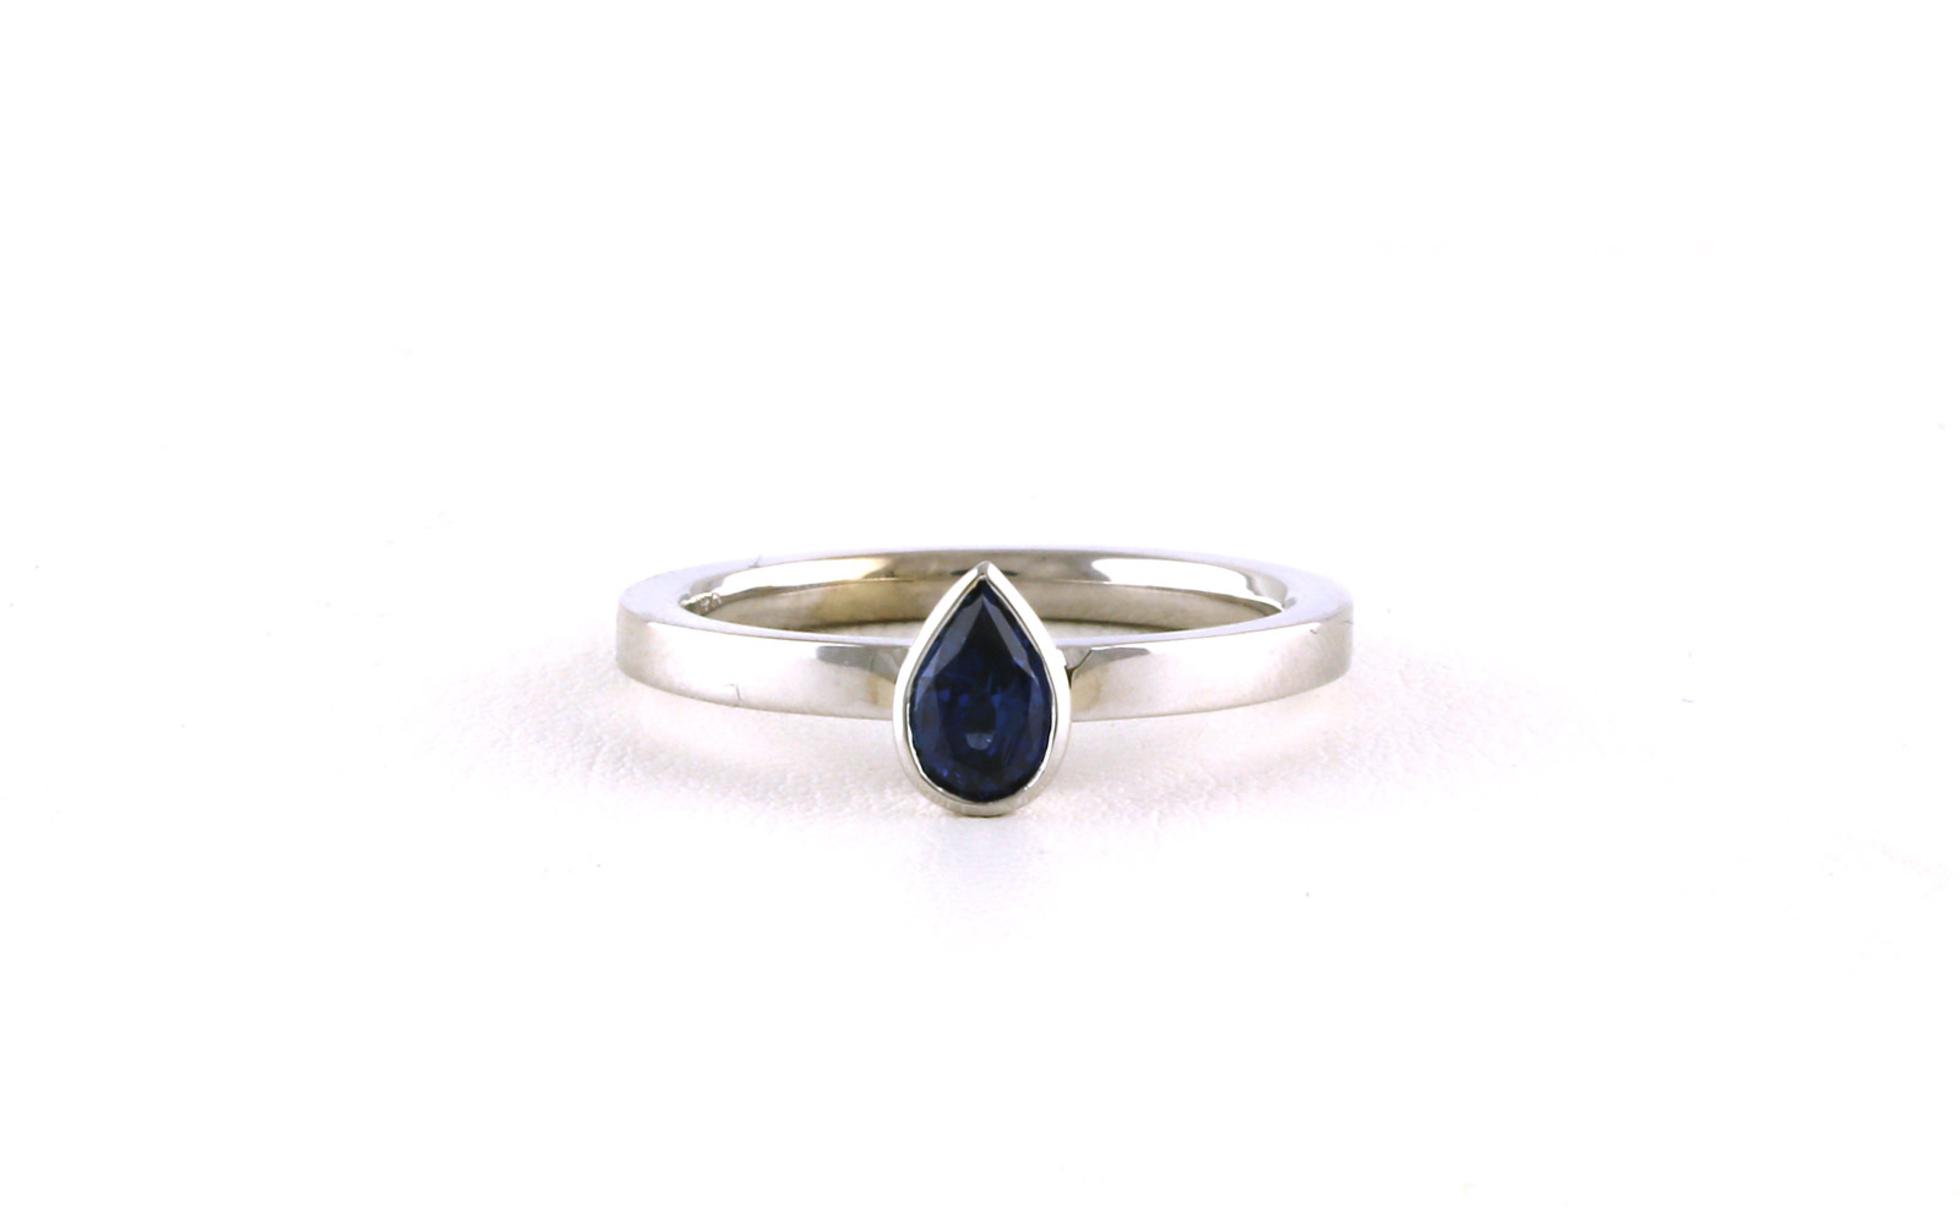 Solitaire-style Bezel-set Pear-cut Montana Yogo Sapphire Ring in White Gold (0.49cts)